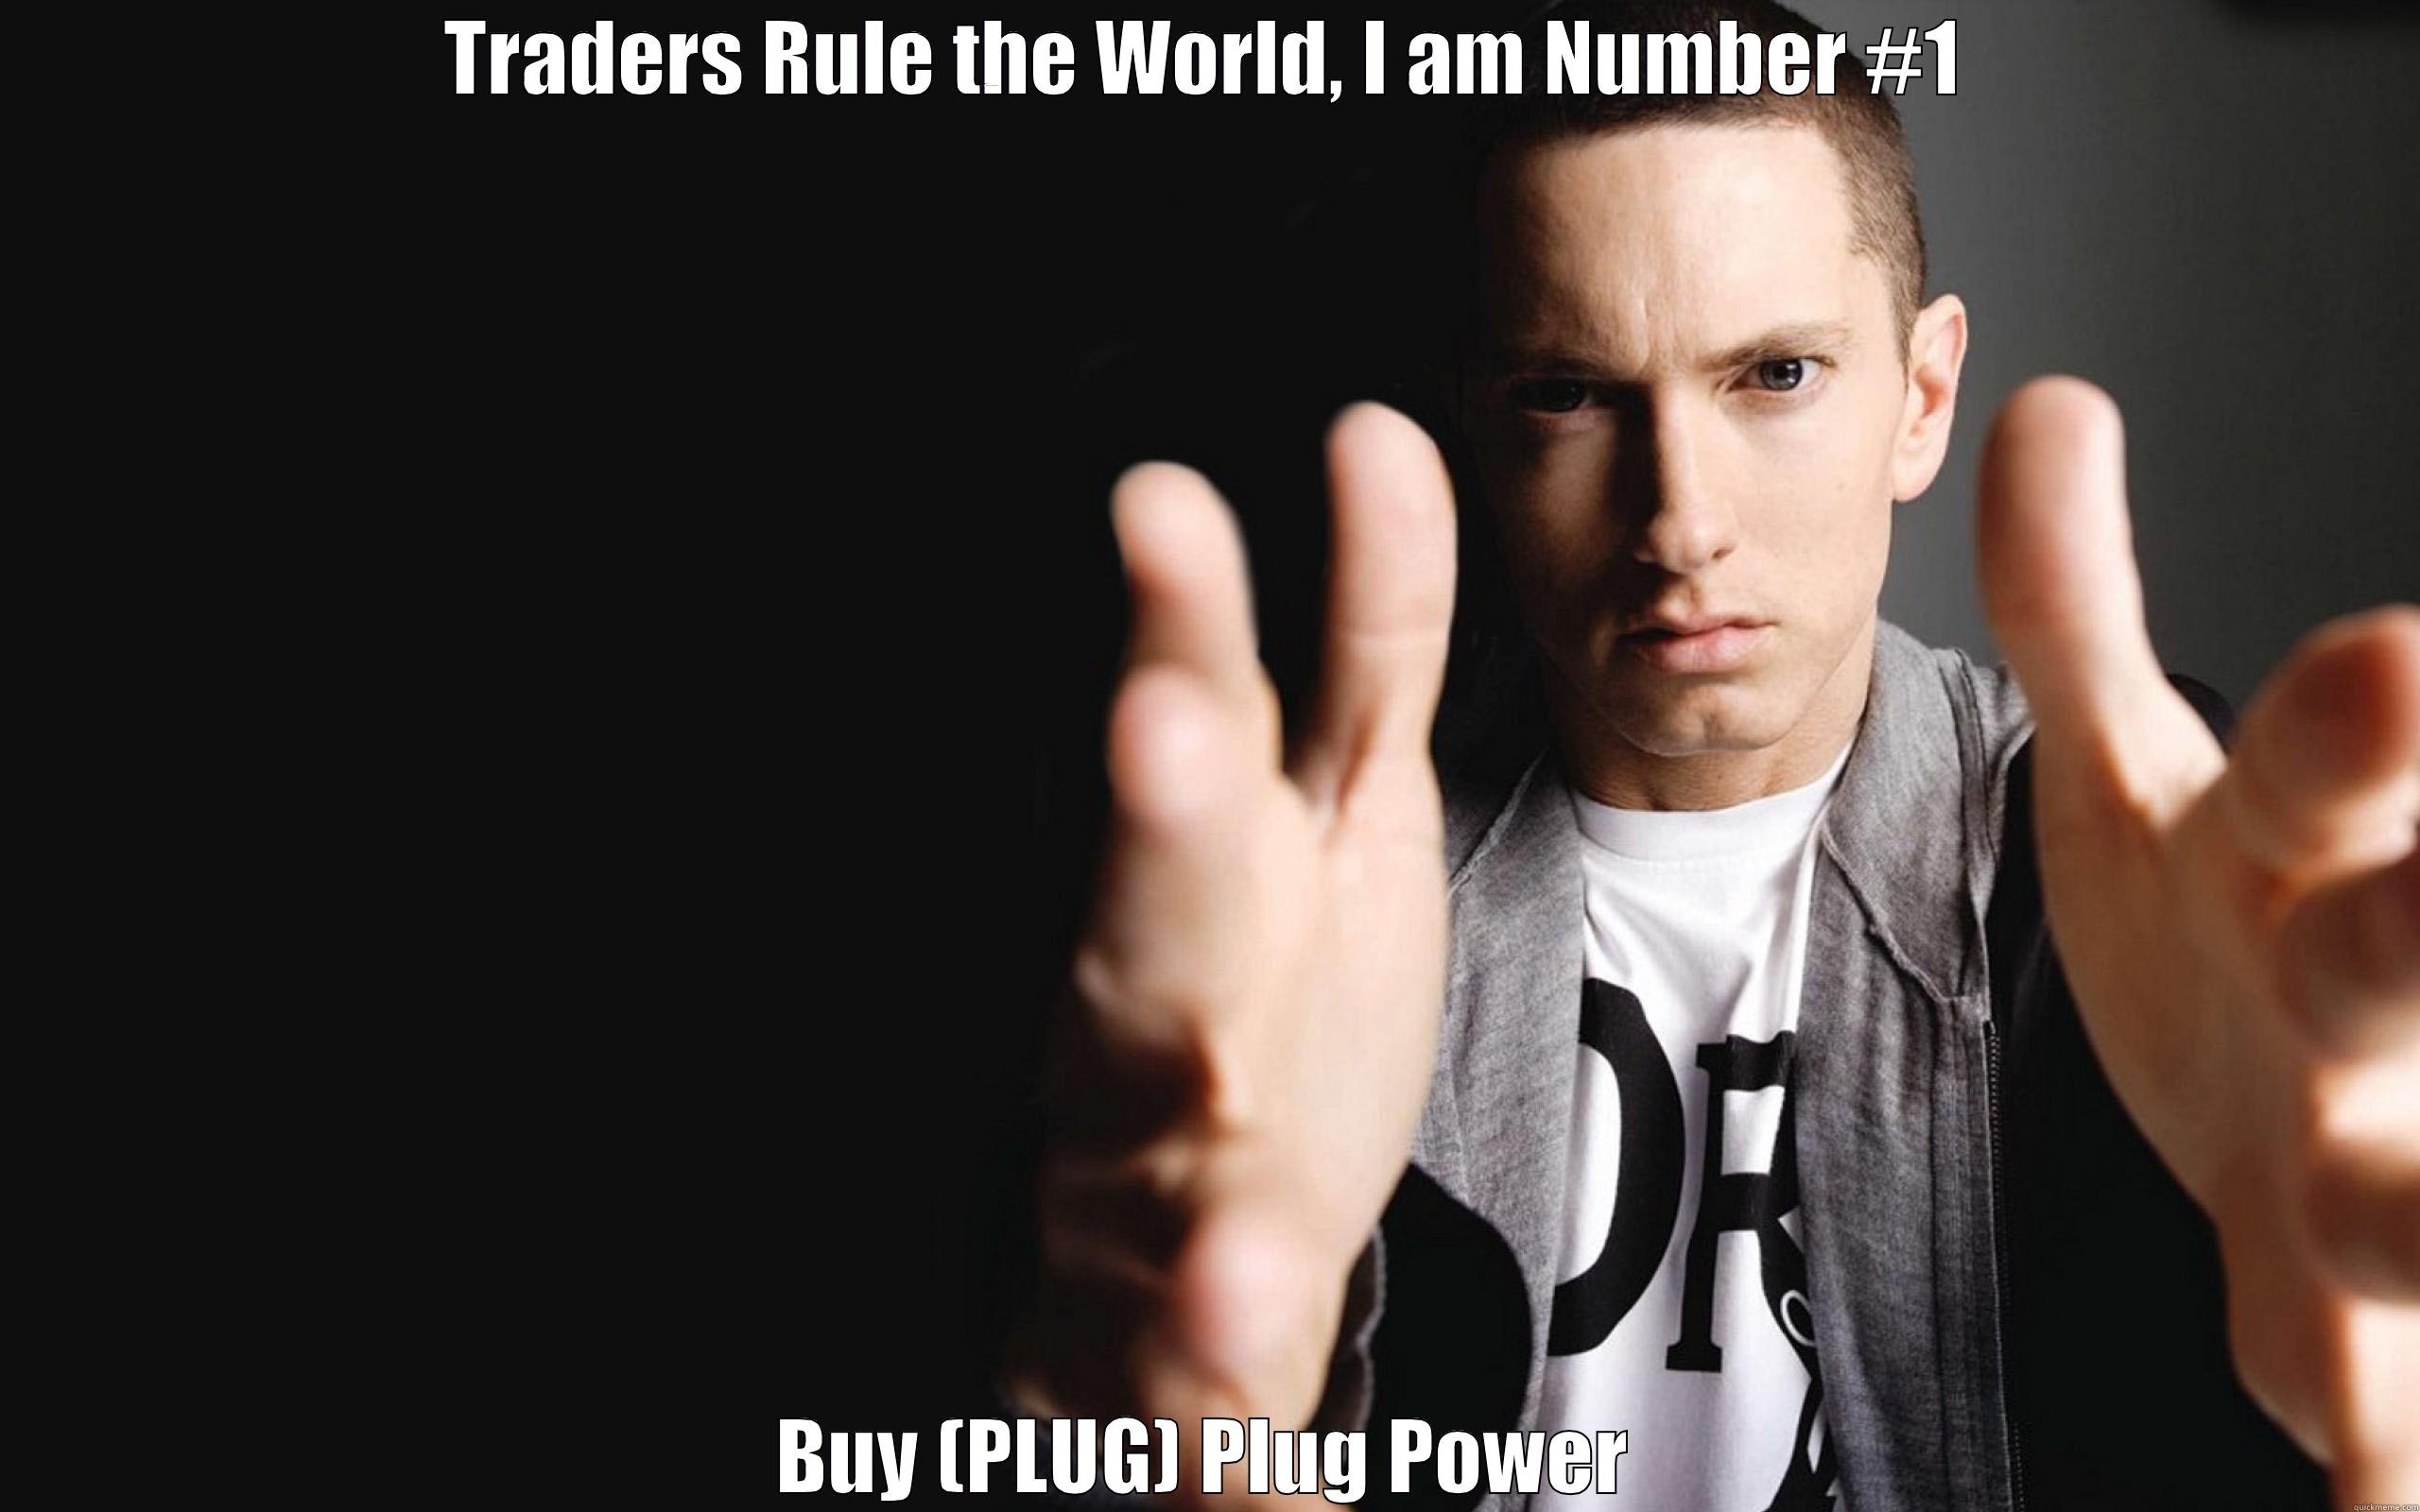 TRADERS RULE THE WORLD, I AM NUMBER #1 BUY (PLUG) PLUG POWER Misc